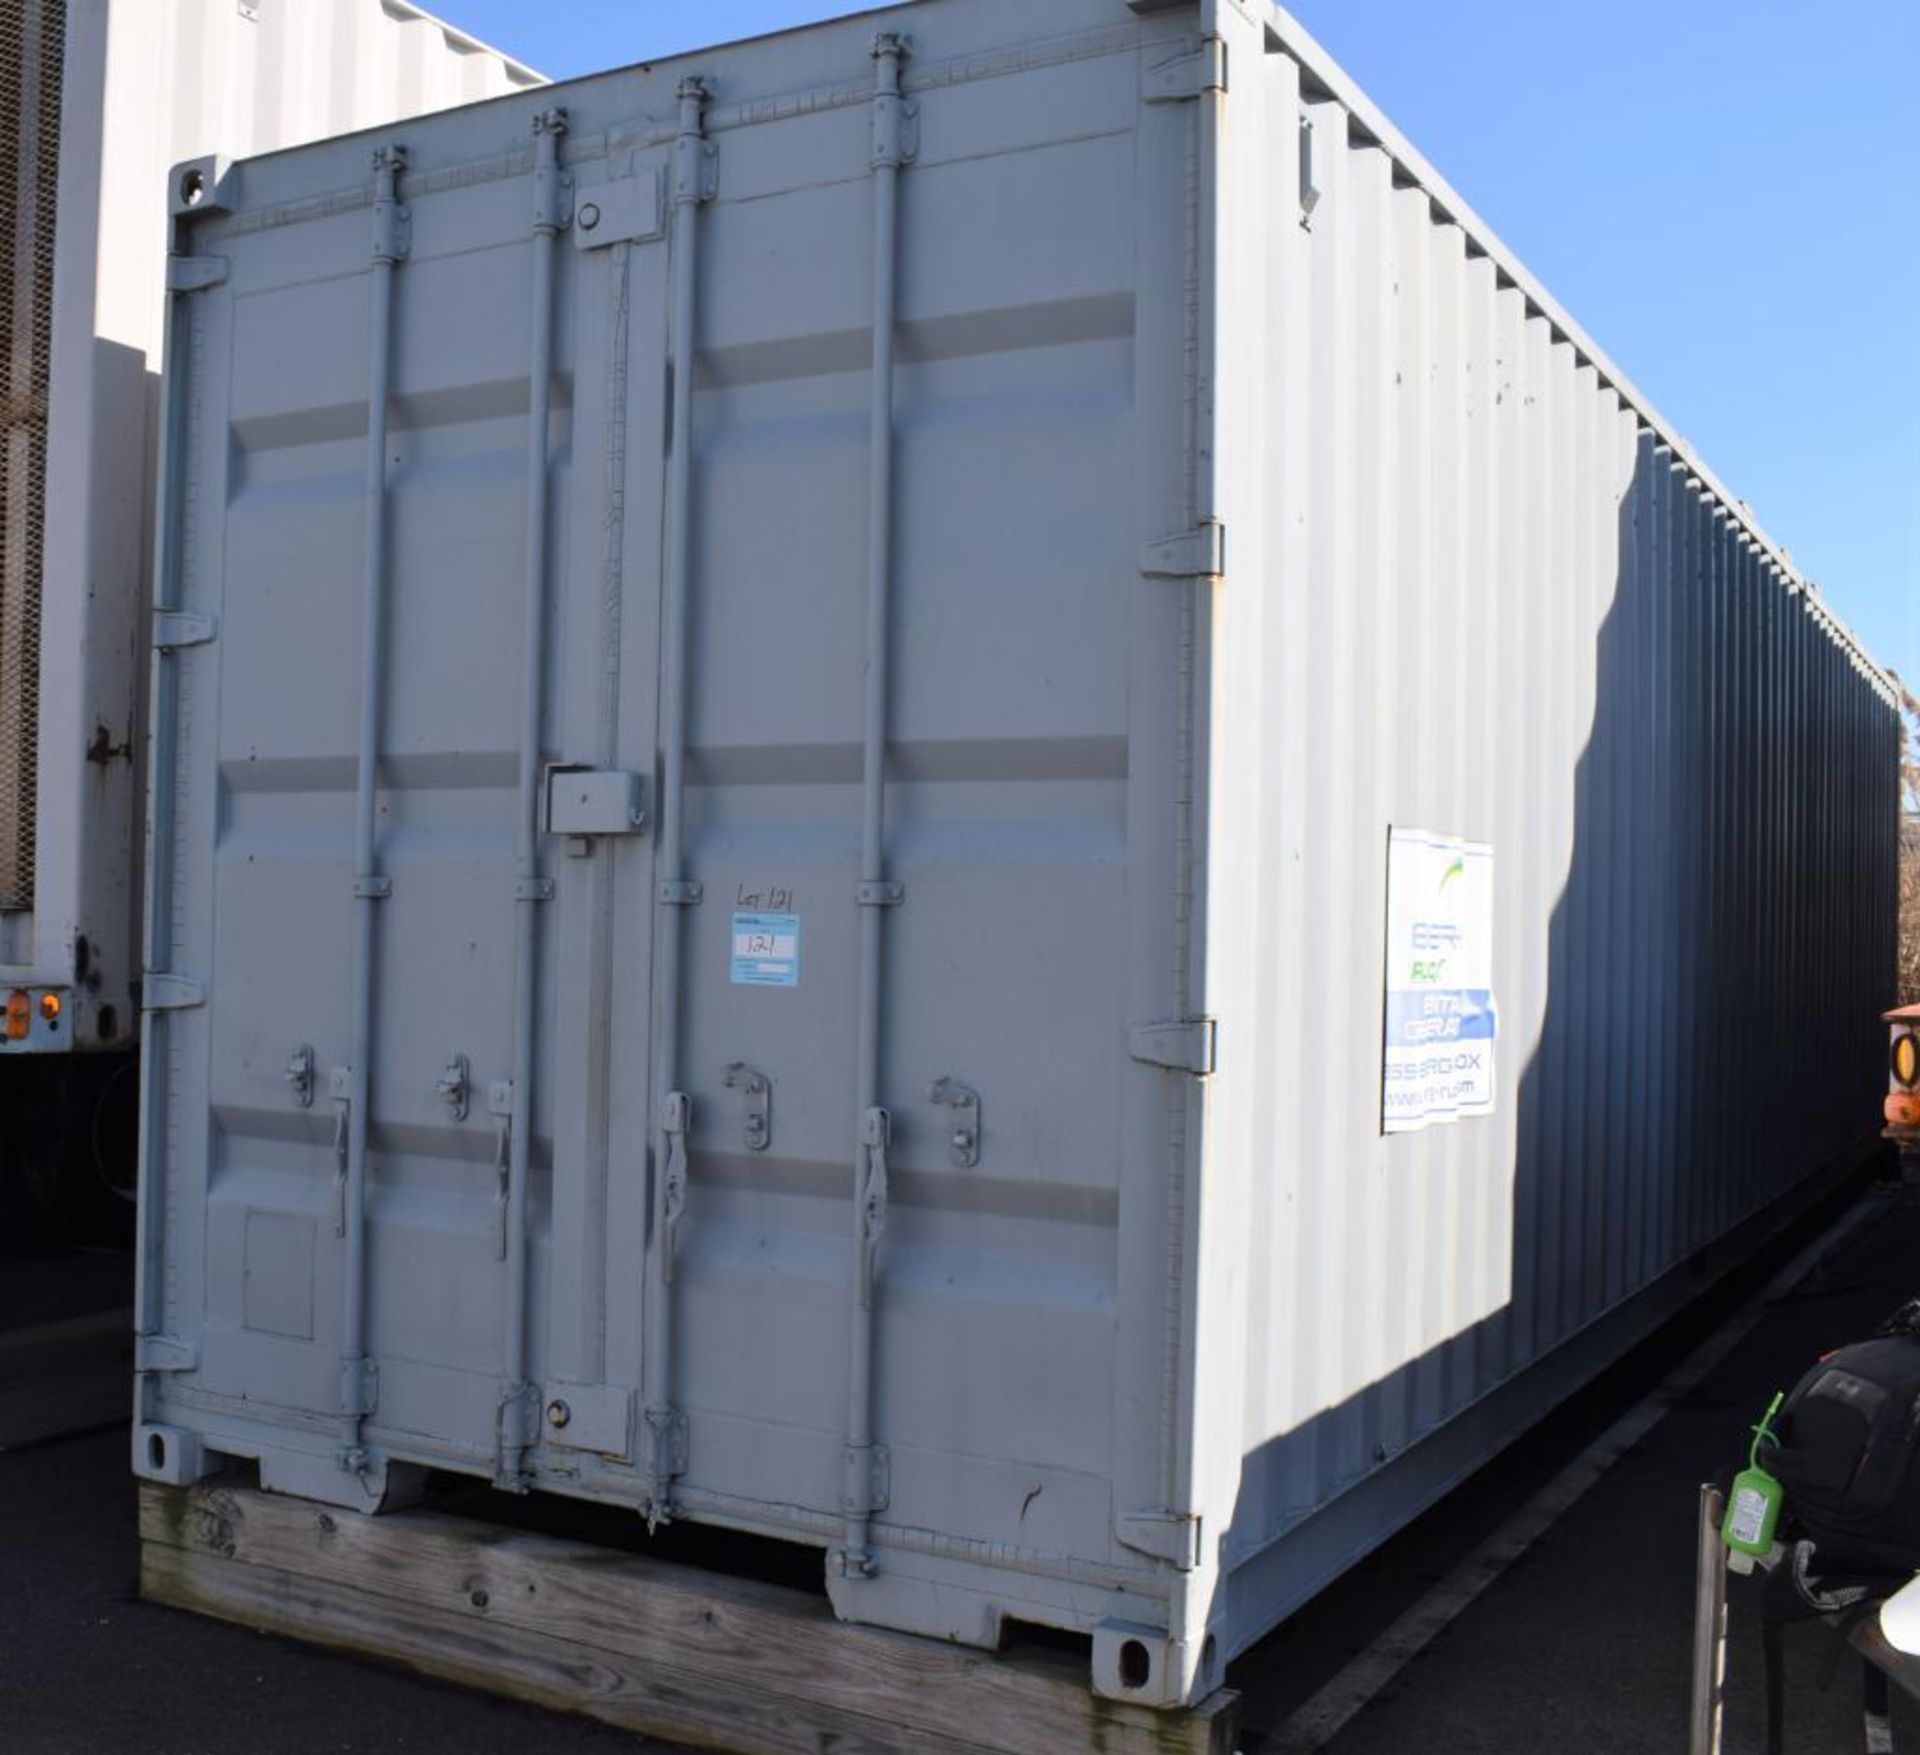 40' Shipping Container With Contents. With cantilever storage racks, metal shelves, oil drum, metal